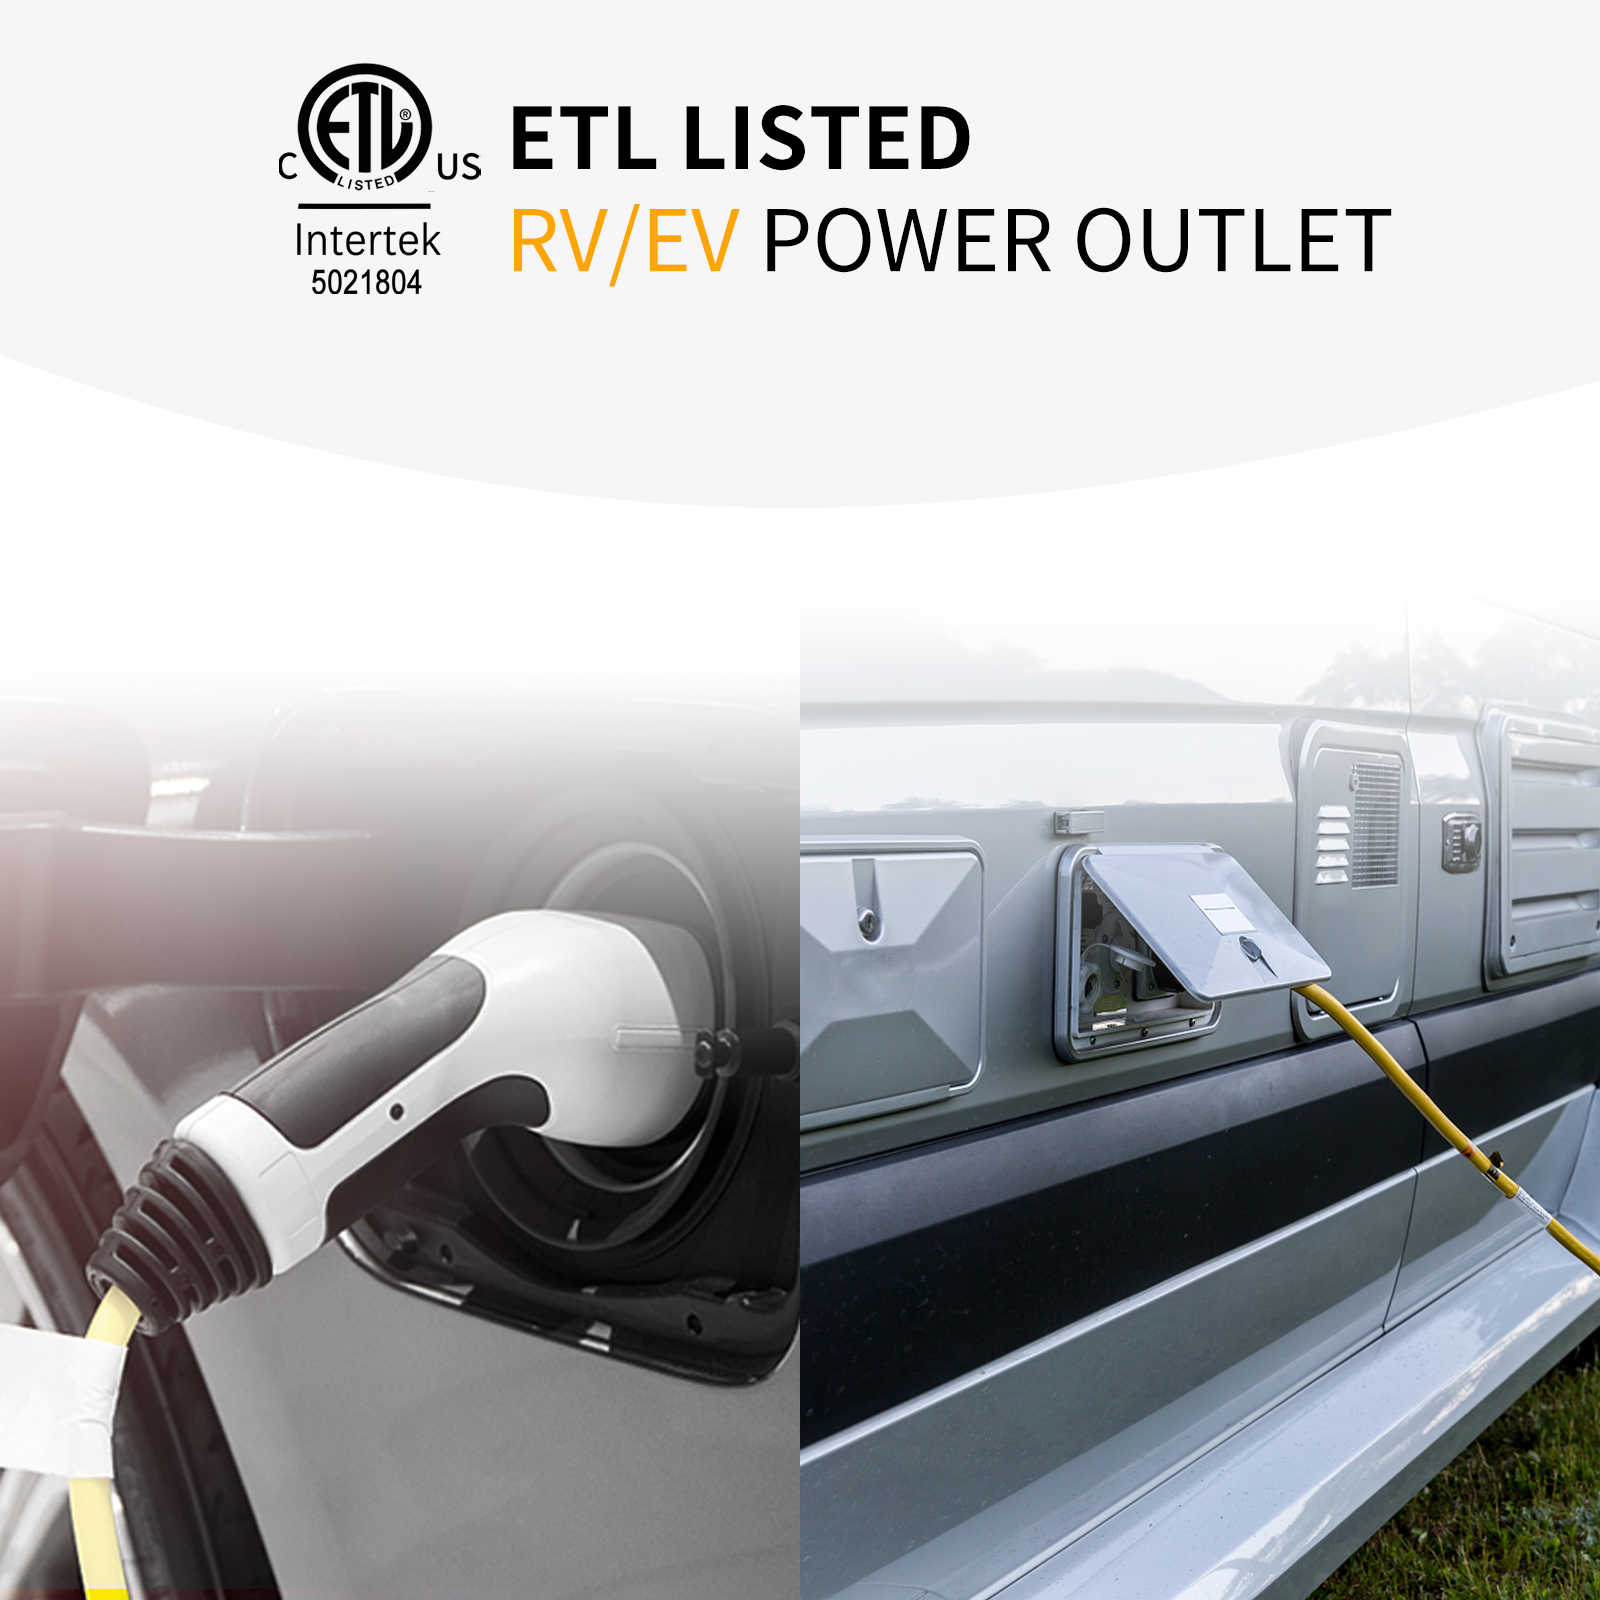 The 10-50R power outlet box can be used to charge RV EV